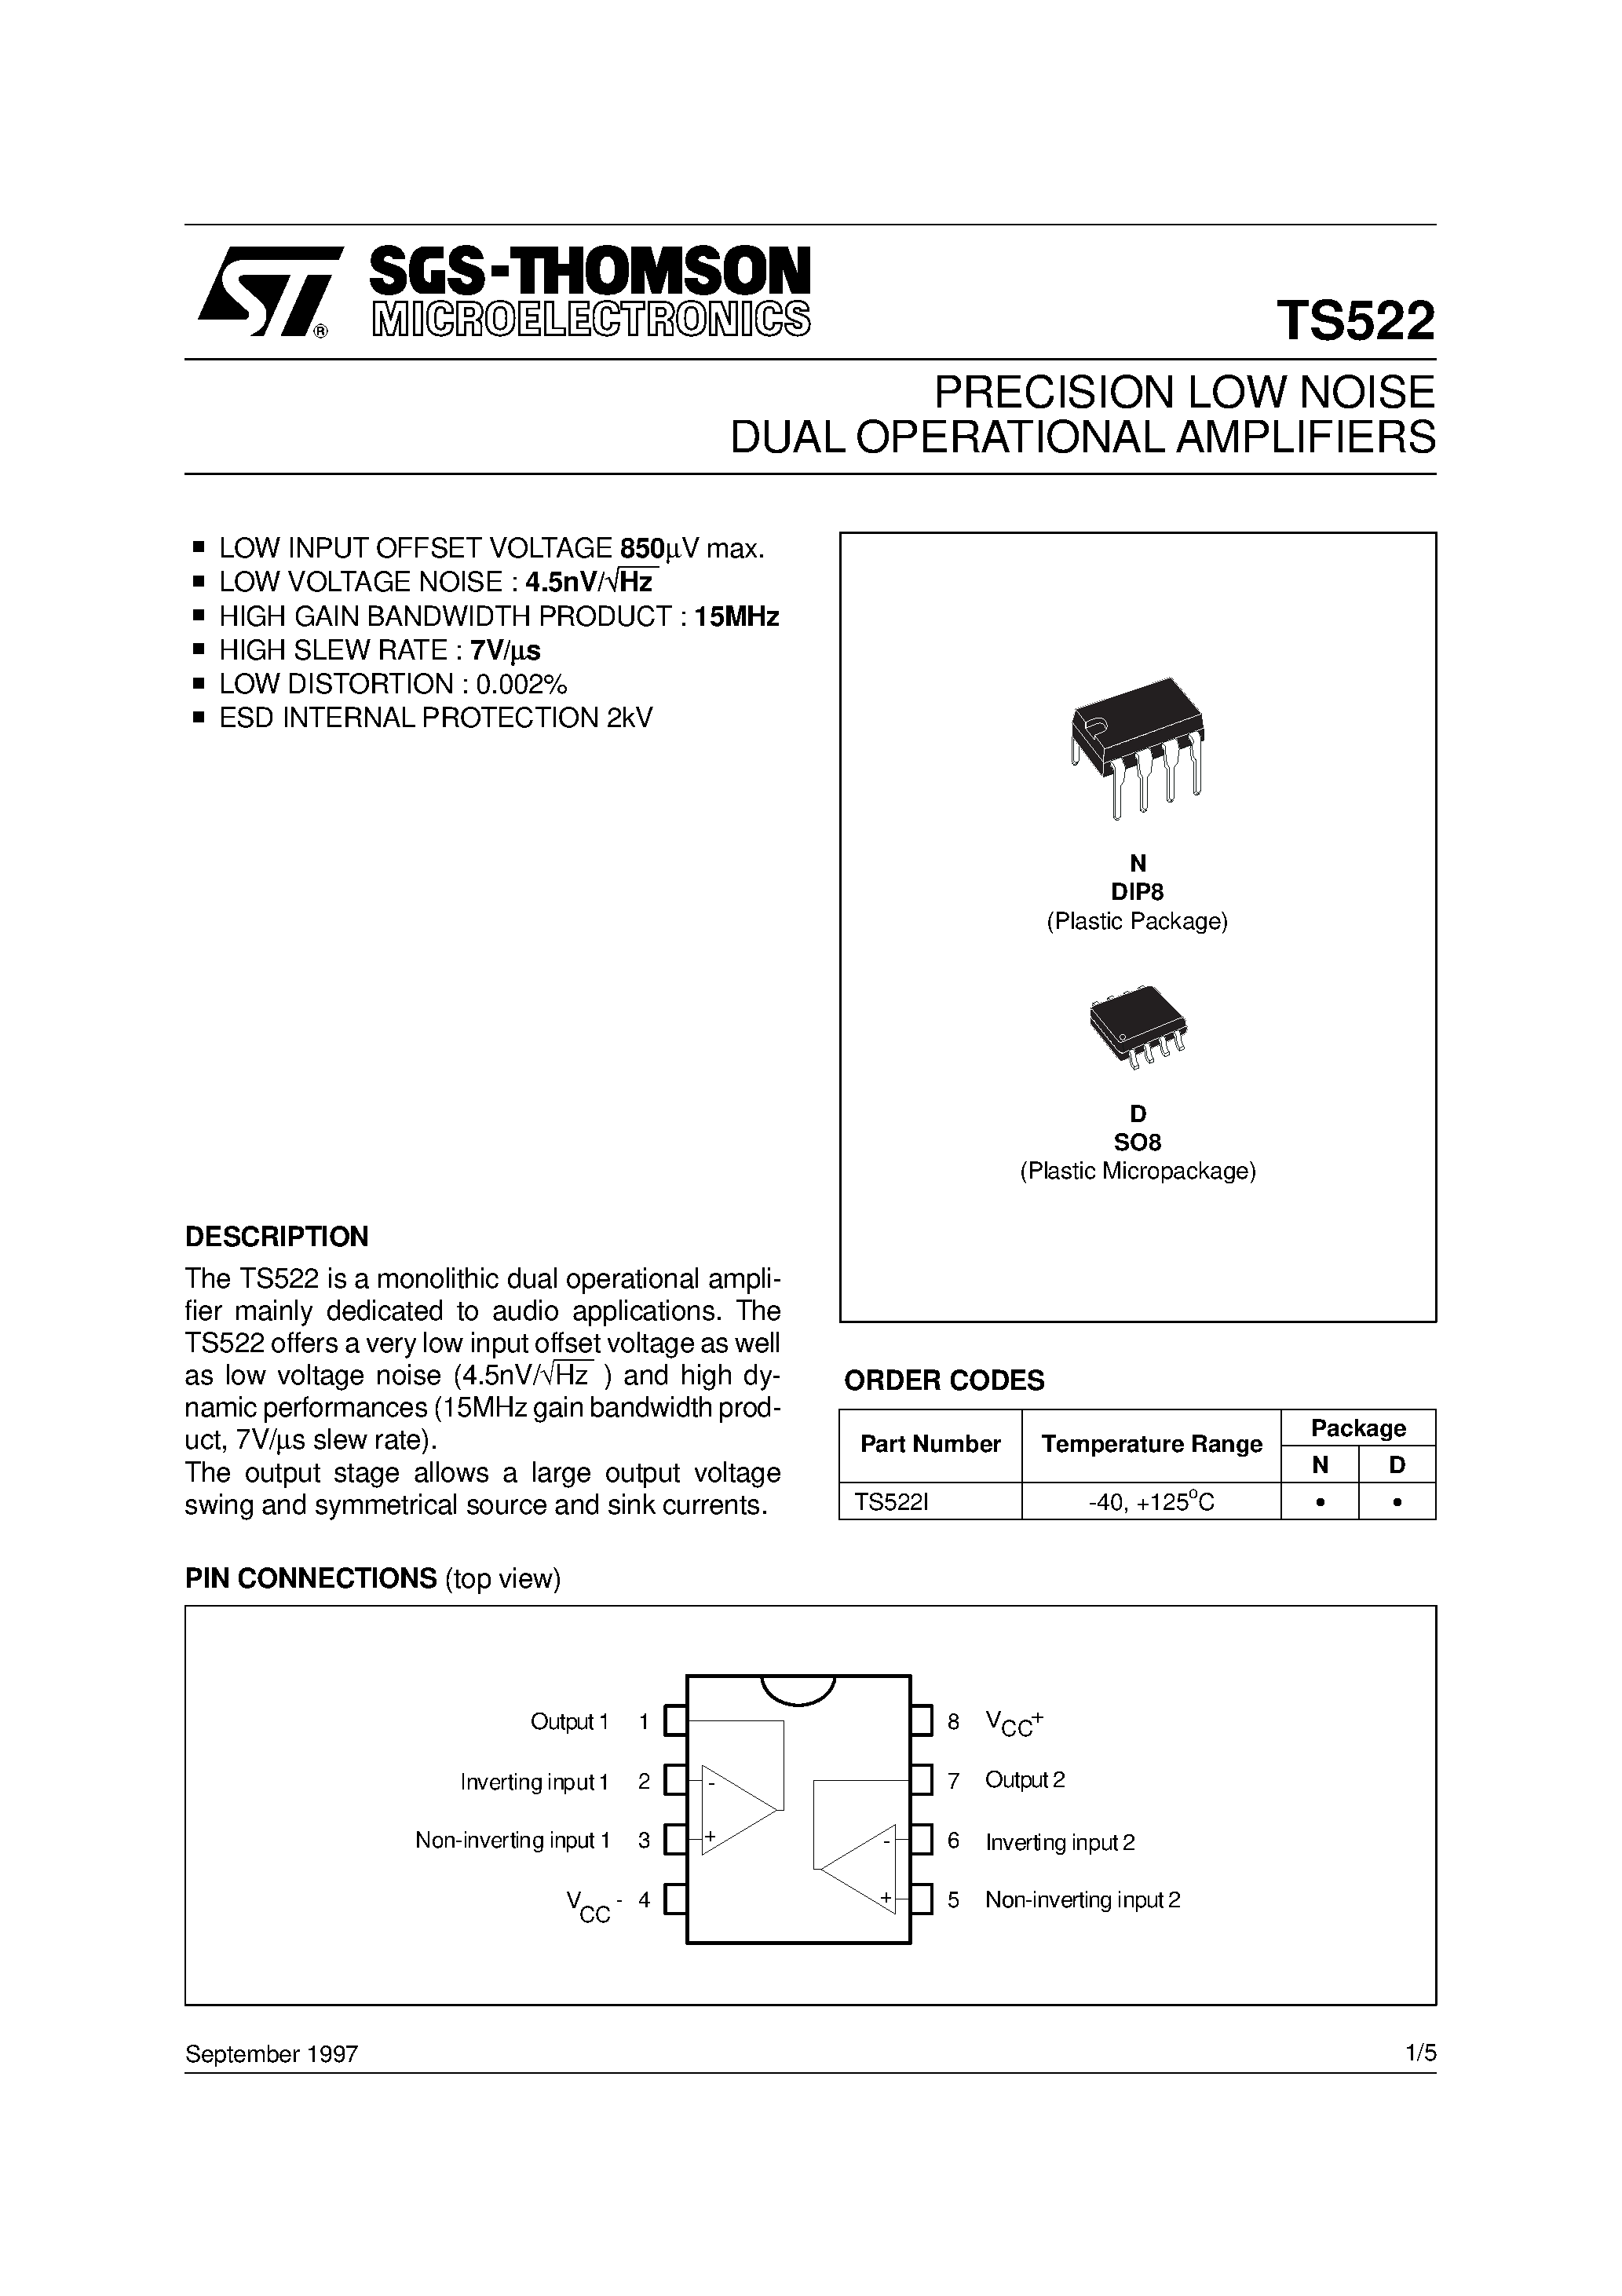 Datasheet TS522I - PRECISION LOW NOISE DUAL OPERATIONAL AMPLIFIERS page 1